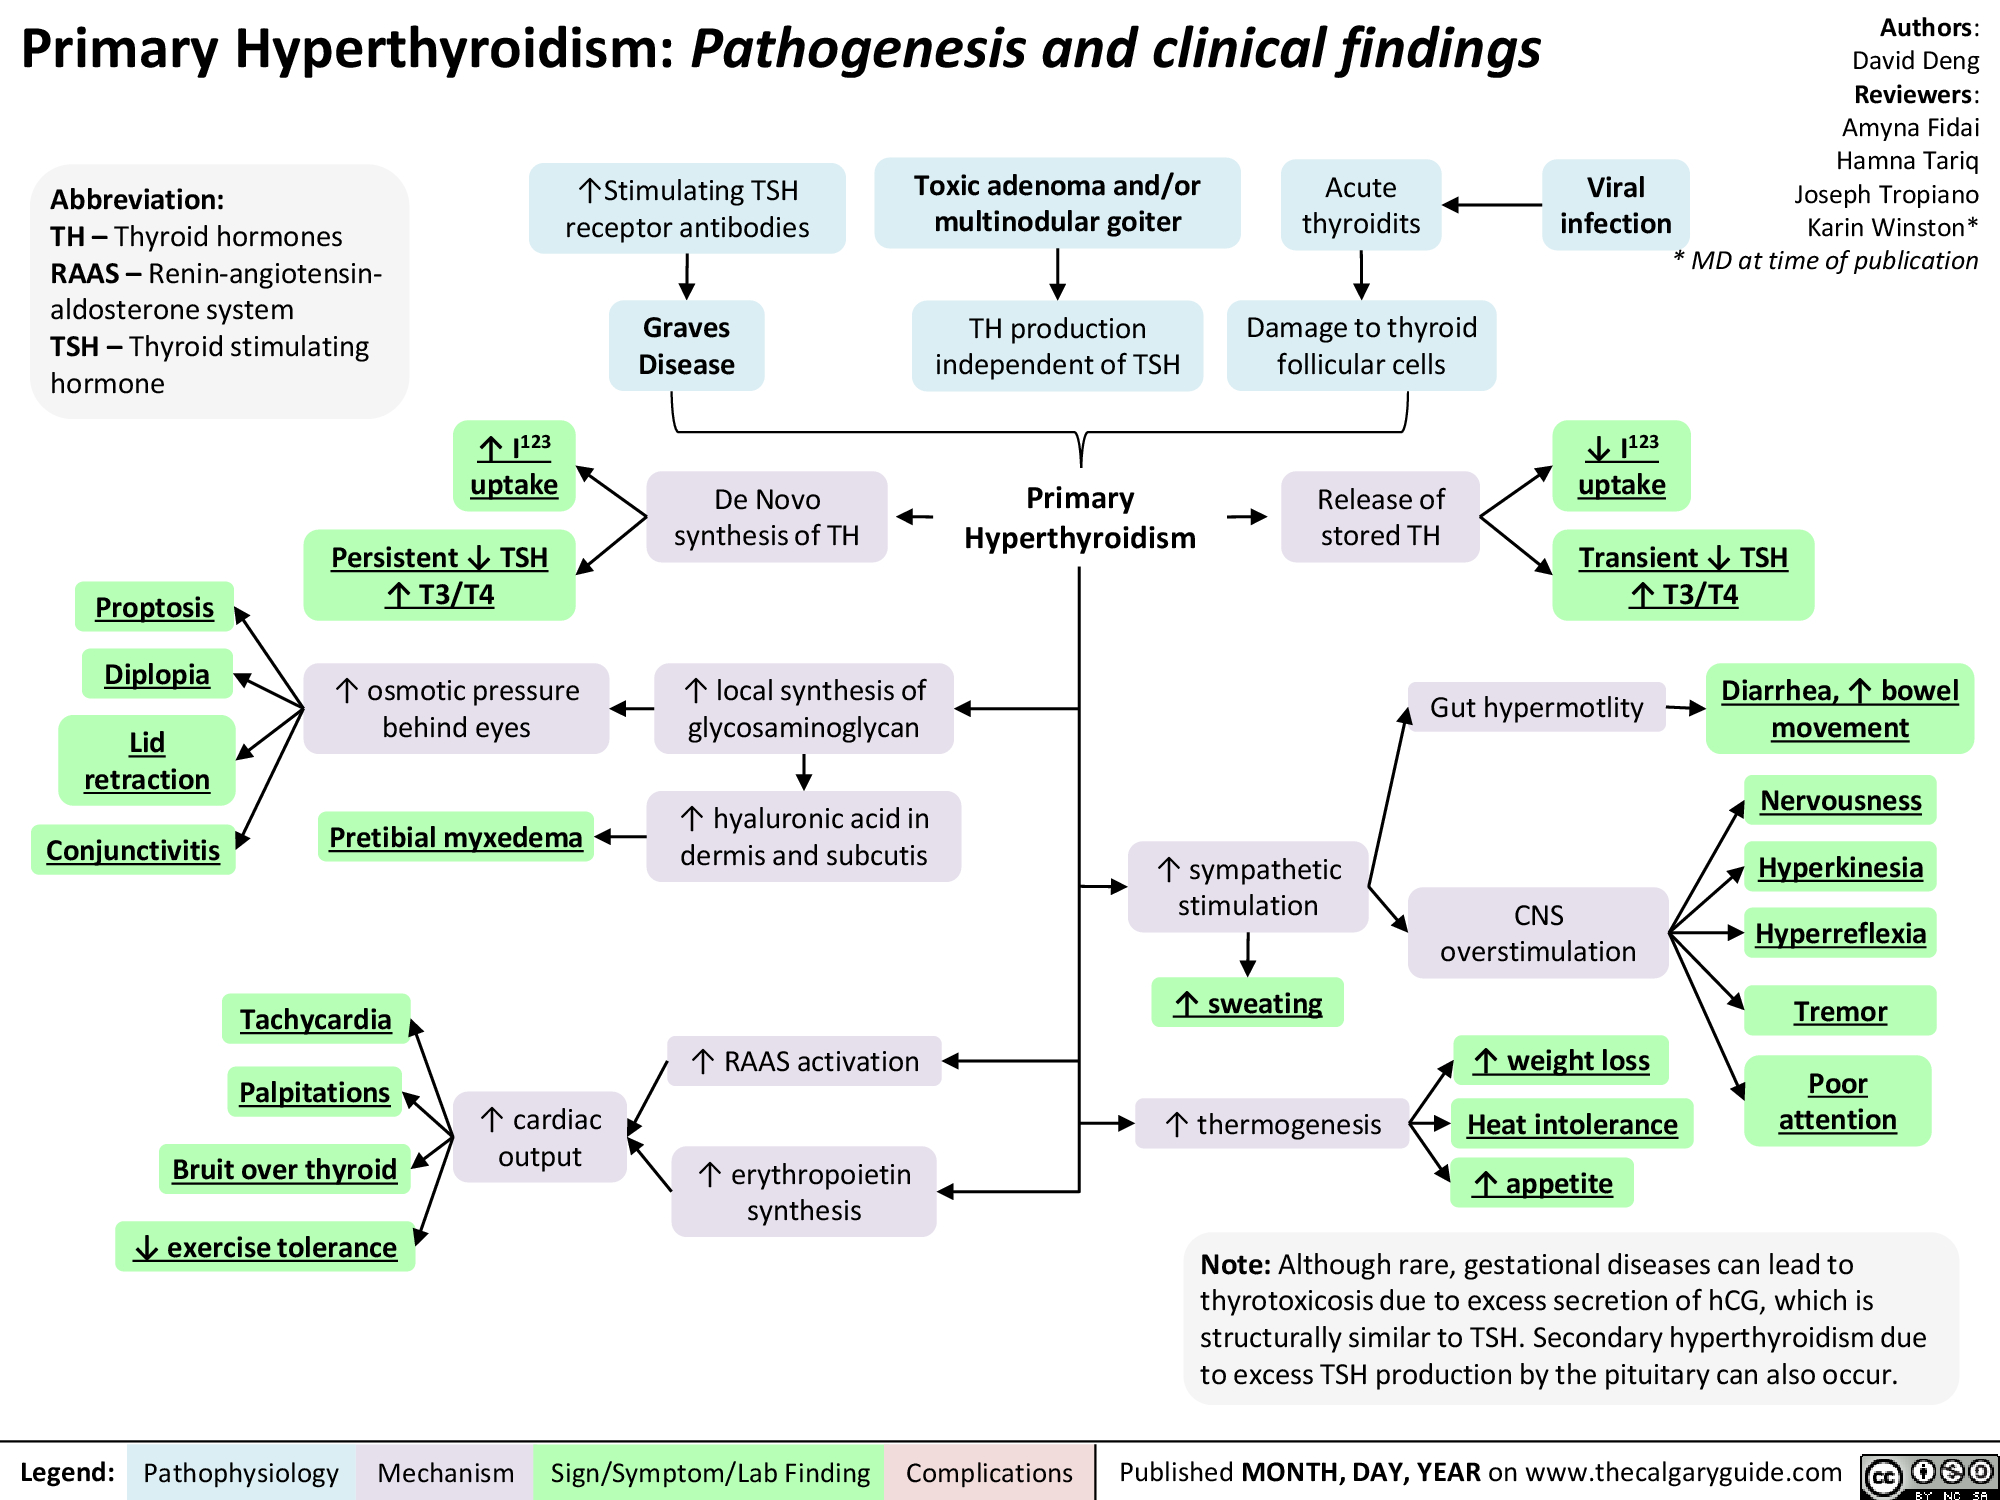 Primary Hyperthyroidism: Pathogenesis and clinical findings 
Abbreviation: TH — Thyroid hormones RAAS— Renin-angiotensin-aldosterone system TSH — Thyroid stimulating hormone 
'`Stimulating TSH receptor antibodies 
Graves Disease 
Toxic adenoma and/or multinodular goiter 
1123 De Novo 4— synthesis of TH uptake Persistent 4, TSH  Proptosis  T3/T4 
Lid retraction  
Conjunctivitis 
t osmotic pressure behind eyes 
Pretibial myxedema  
Tachycardia  Palpitations  Bruit over thyroid  4, exercise tolerance  
t cardiac output 
Legend: Pathophysiology Mechanism 
t local synthesis of glycosaminoglycan 
hyaluronic acid in dermis and subcutis 
TH production independent of TSH 
Acute thyroidits 
Damage to thyroid follicular cells 
Y Primary Hyperthyroidism 
4  
RAAS activation •  
erythropoietin synthesis 
Sign/Symptom/Lab Finding 
Release of stored TH 
t sympathetic stimulation 
T sweating 
thermogenesis 

Viral infection 
Authors: David Deng Reviewers: Amyna Fidai Hamna Tariq Joseph Tropiano Karin Winston* * MD at time of publication 
4, 1123 uptake 
Transient 4, TSH  T3/T4  
Gut hypermotlity --* 
CNS overstimulation 

Diarrhea, t bowel movement  
t weight loss  Heat intolerance t appetite  
Nervousness 
Hyperkinesia 
Hyperreflexia 
Tremor 
Poor  attention 
Note: Although rare, gestational diseases can lead to thyrotoxicosis due to excess secretion of hCG, which is structurally similar to TSH. Secondary hyperthyroidism due to excess TSH production by the pituitary can also occur. 
Complications I Published MONTH, DAY, YEAR on www.thecalgaryguide.com 0 GS' I 4; 
